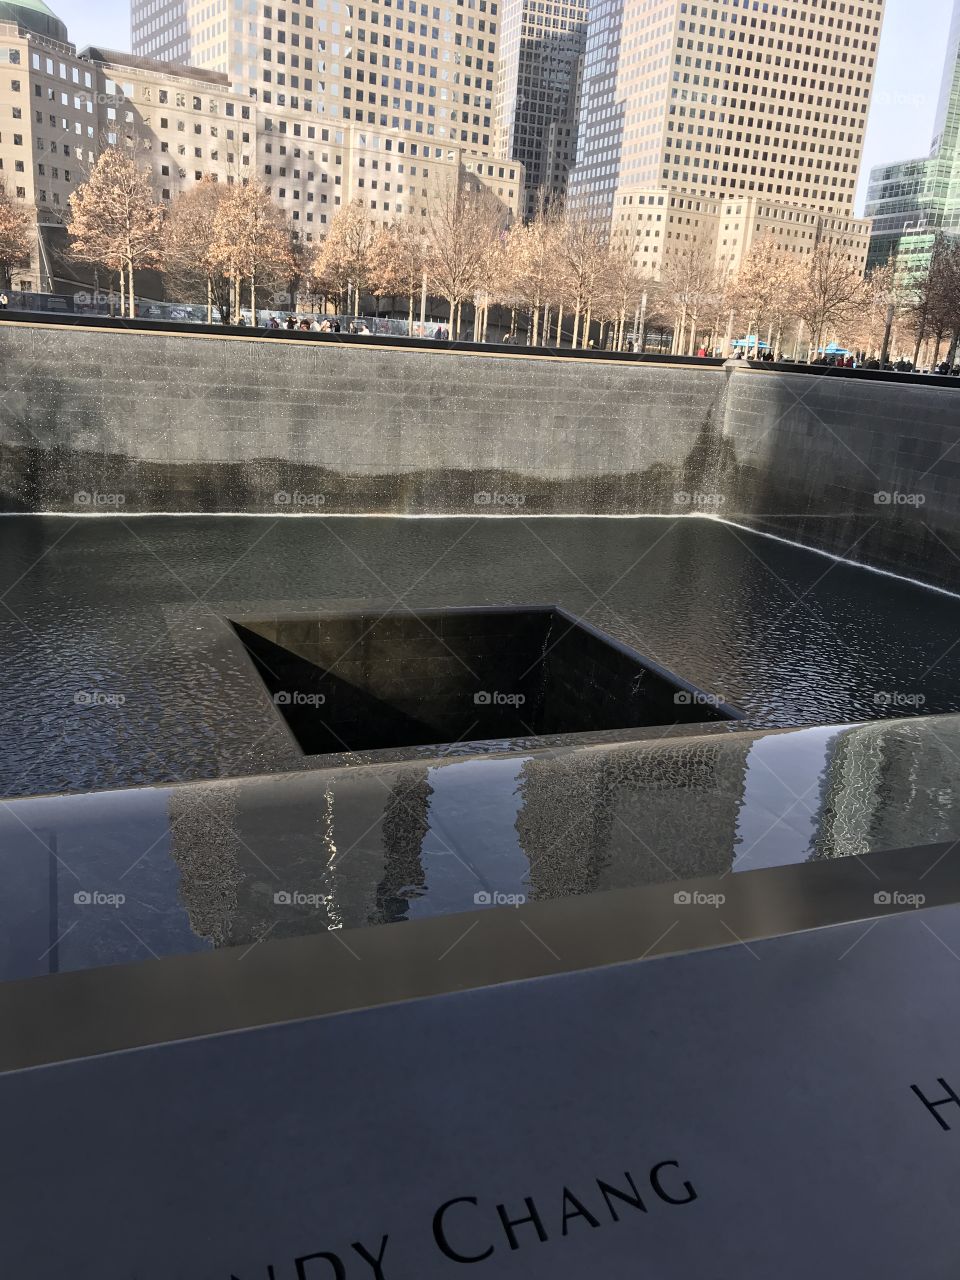 The twin towers monument.